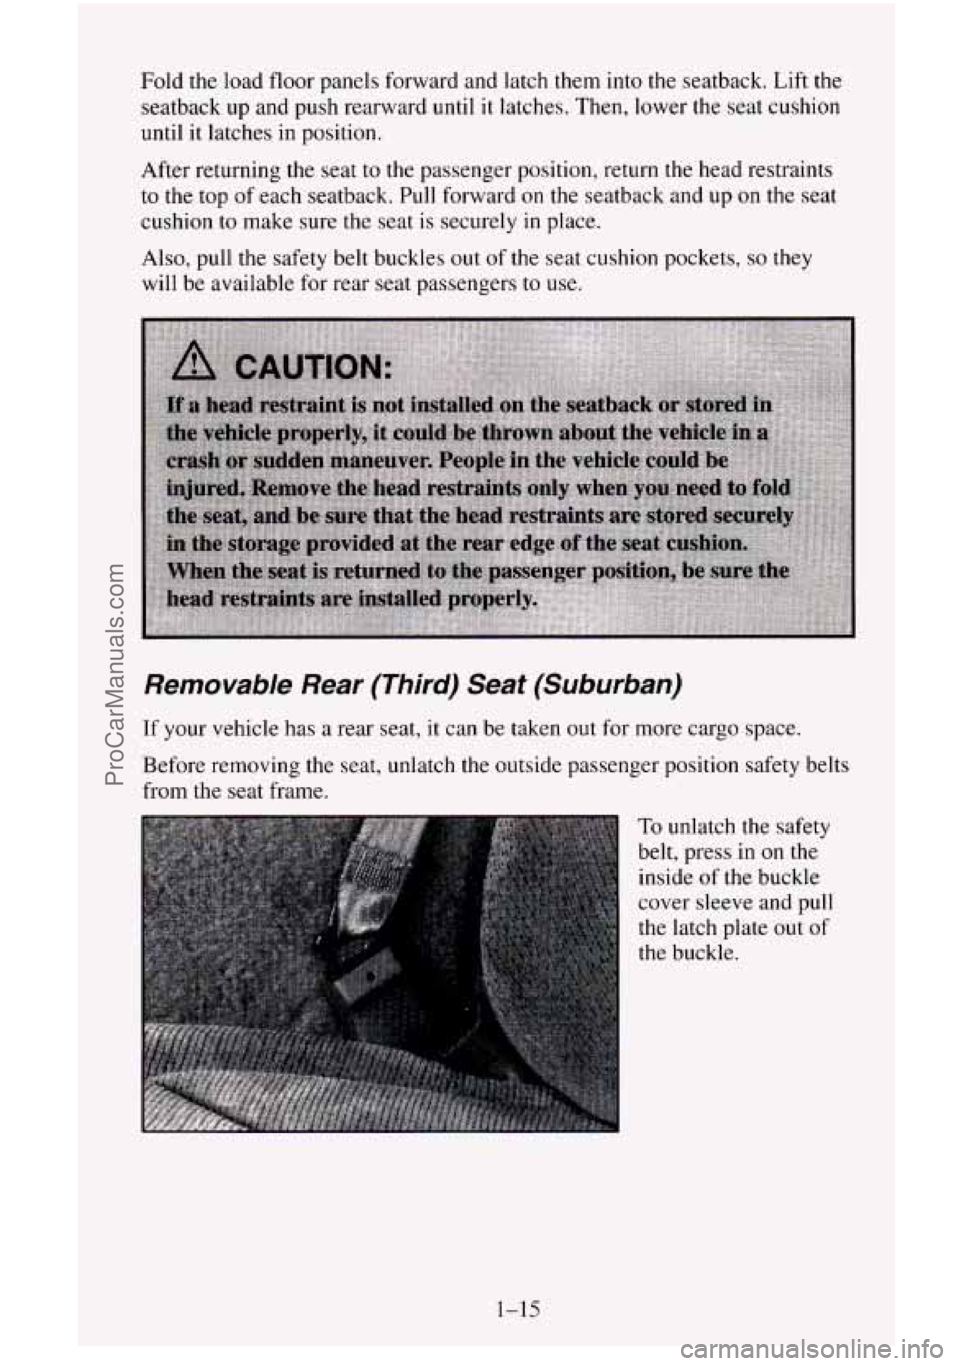 CHEVROLET SUBURBAN 1996 Owners Manual Fold  the  load  floor  panels forward and latch them into the  seatback.  Lift the 
seatback  up and push rearward  until 
it latches.  Then,  lower the seat  cushion 
until  it  latches  in position